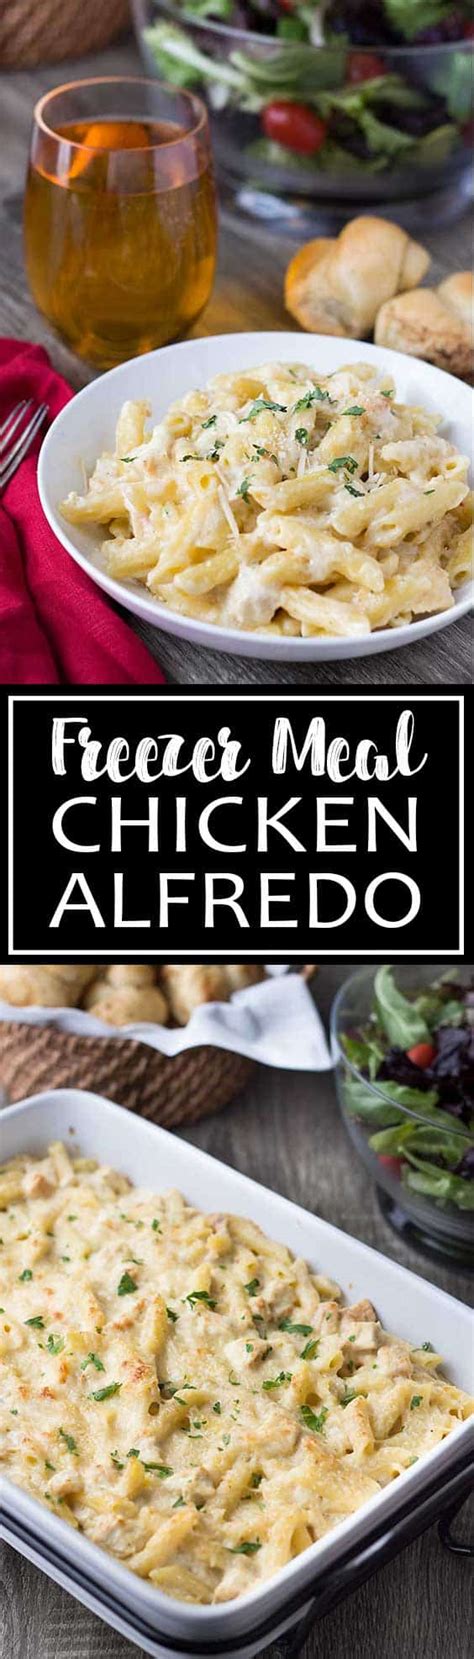 You can even make it ahead of time and pop it in the oven when you're getting ready to eat! Chicken Alfredo Bake | Make-Ahead Meal Mom